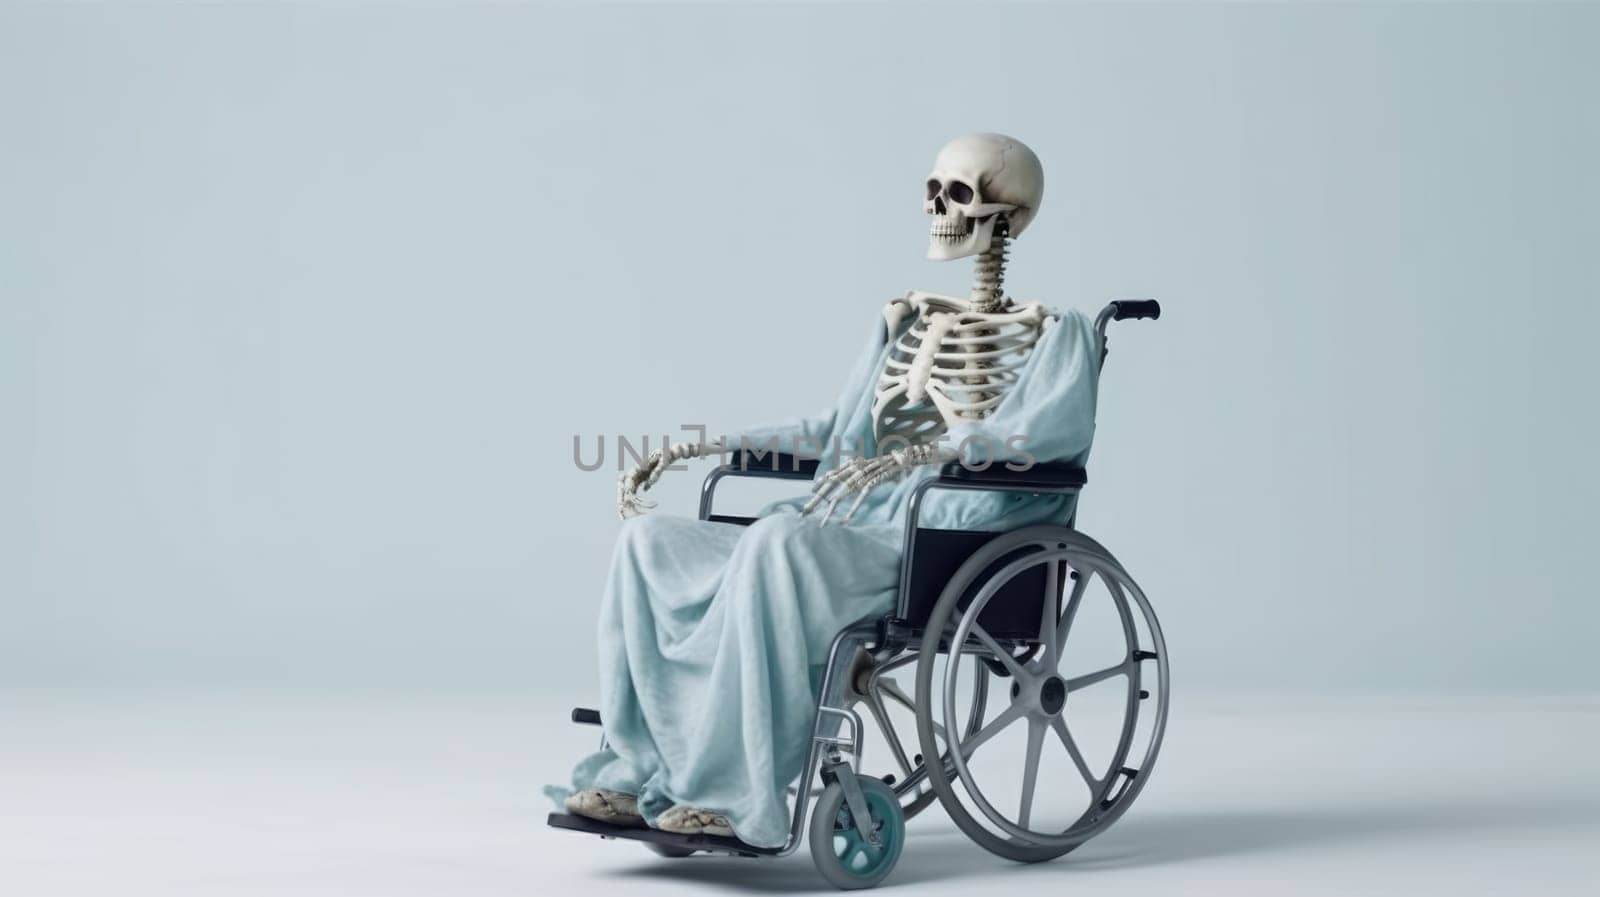 Human skeleton in medical wheelchair for invalid patient on white empty background. Hospital health care support.